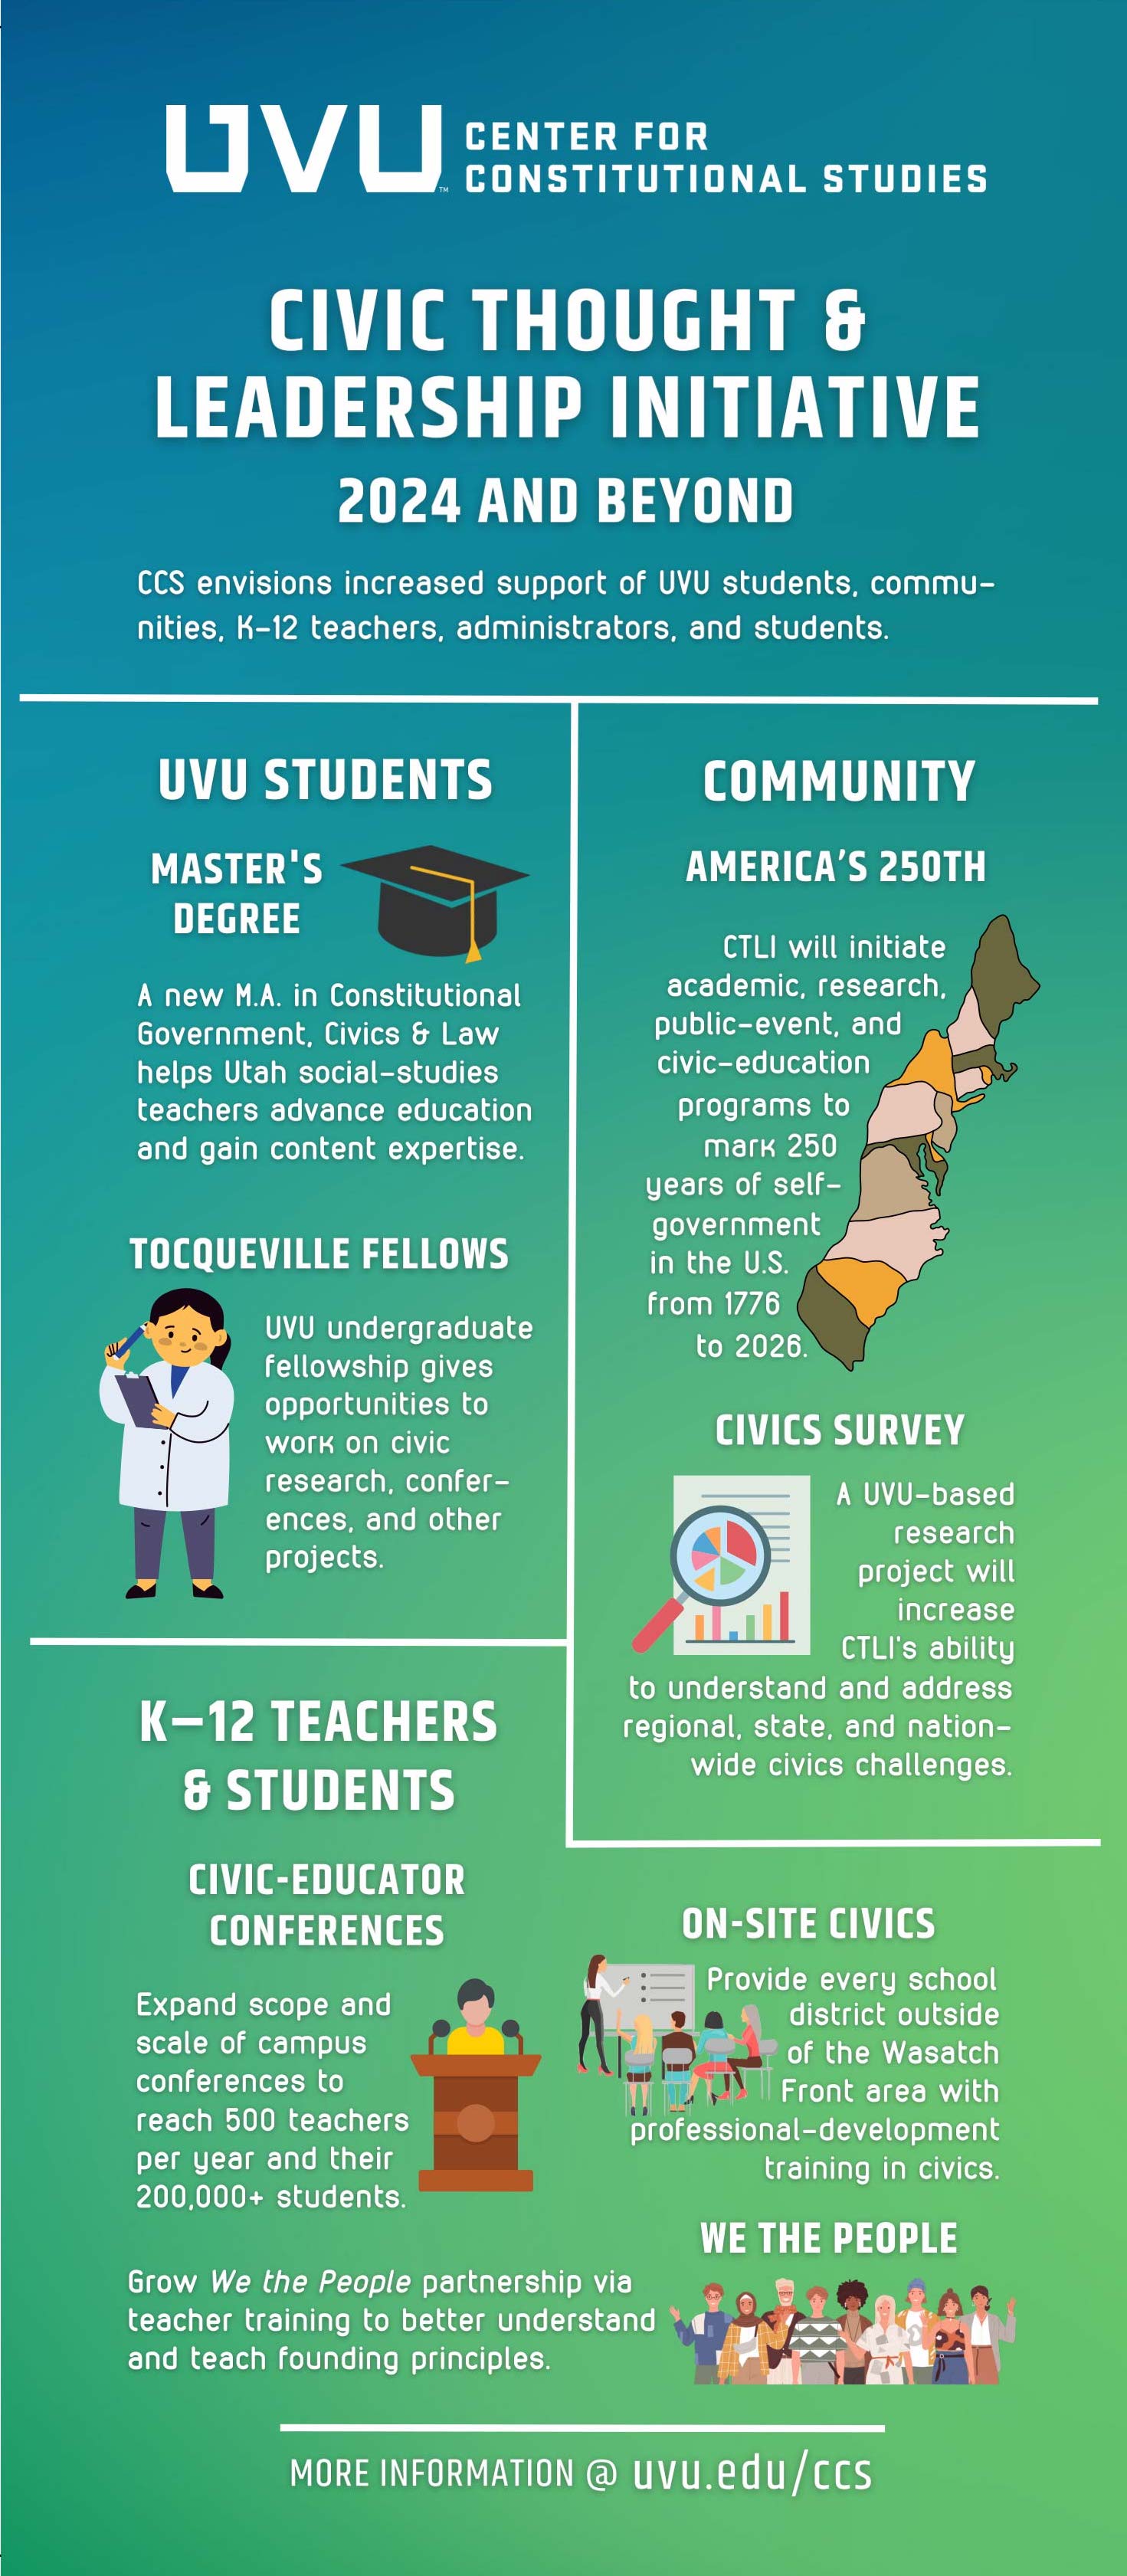 CTLI 2024 and Beyond - with the help of the Utah Legislature, and in cooperation with USBE, CCS can increase the reach of its current support to UVU students, the community, and K-12 teachers and students